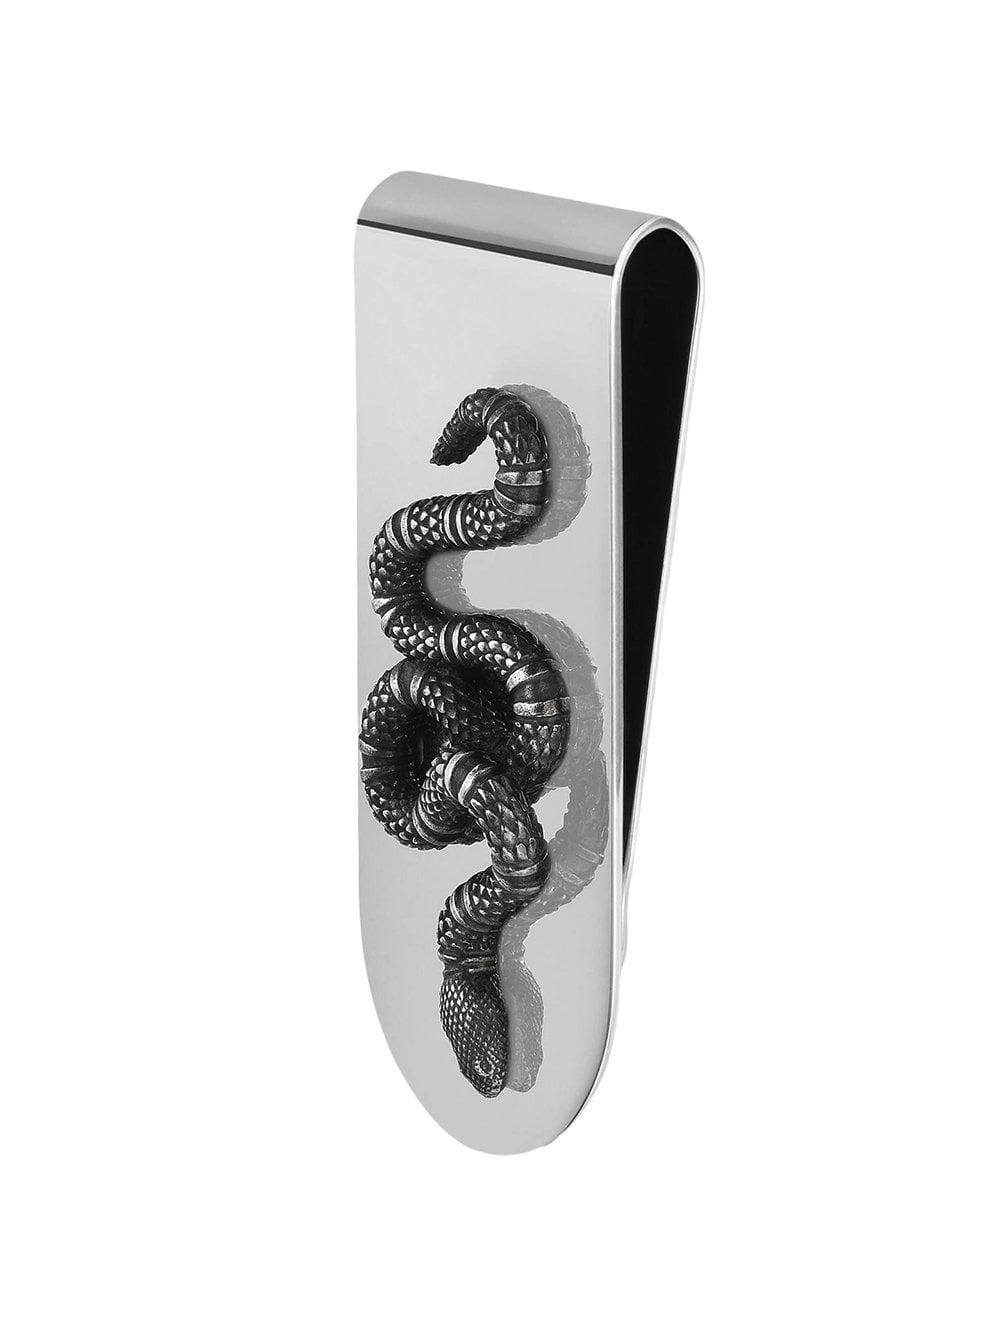 GUCCI - King Snake Sterling Silver Money Clip .925 - – Luxe Hanger